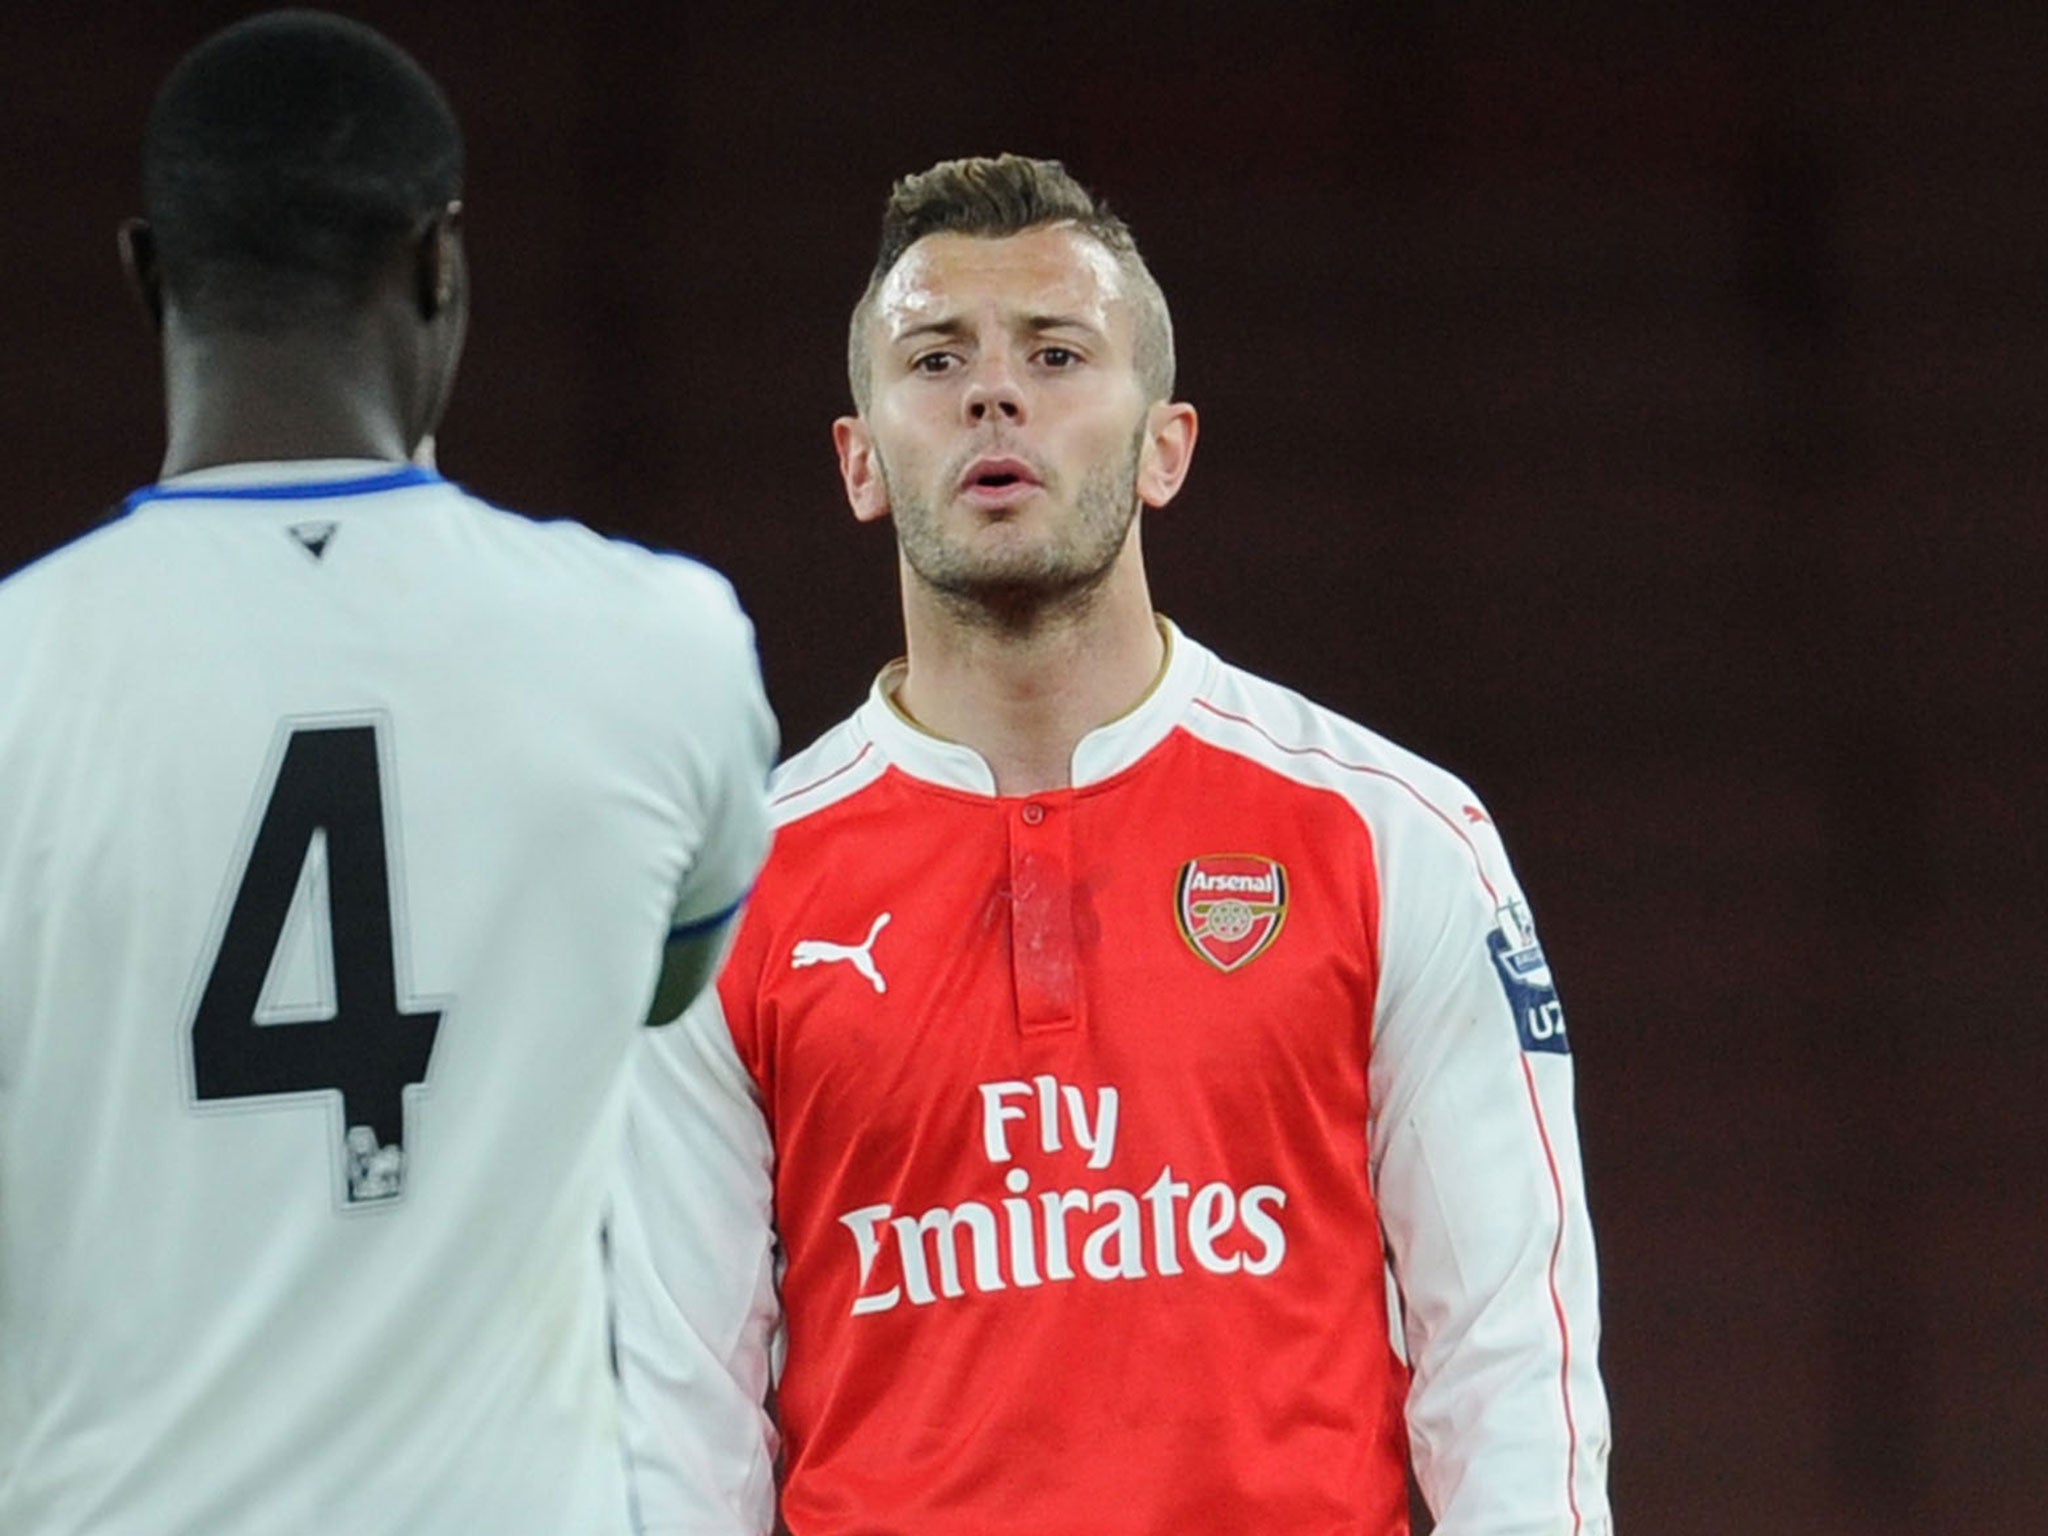 Jack Wilshere playing for Arsenal Under-21s